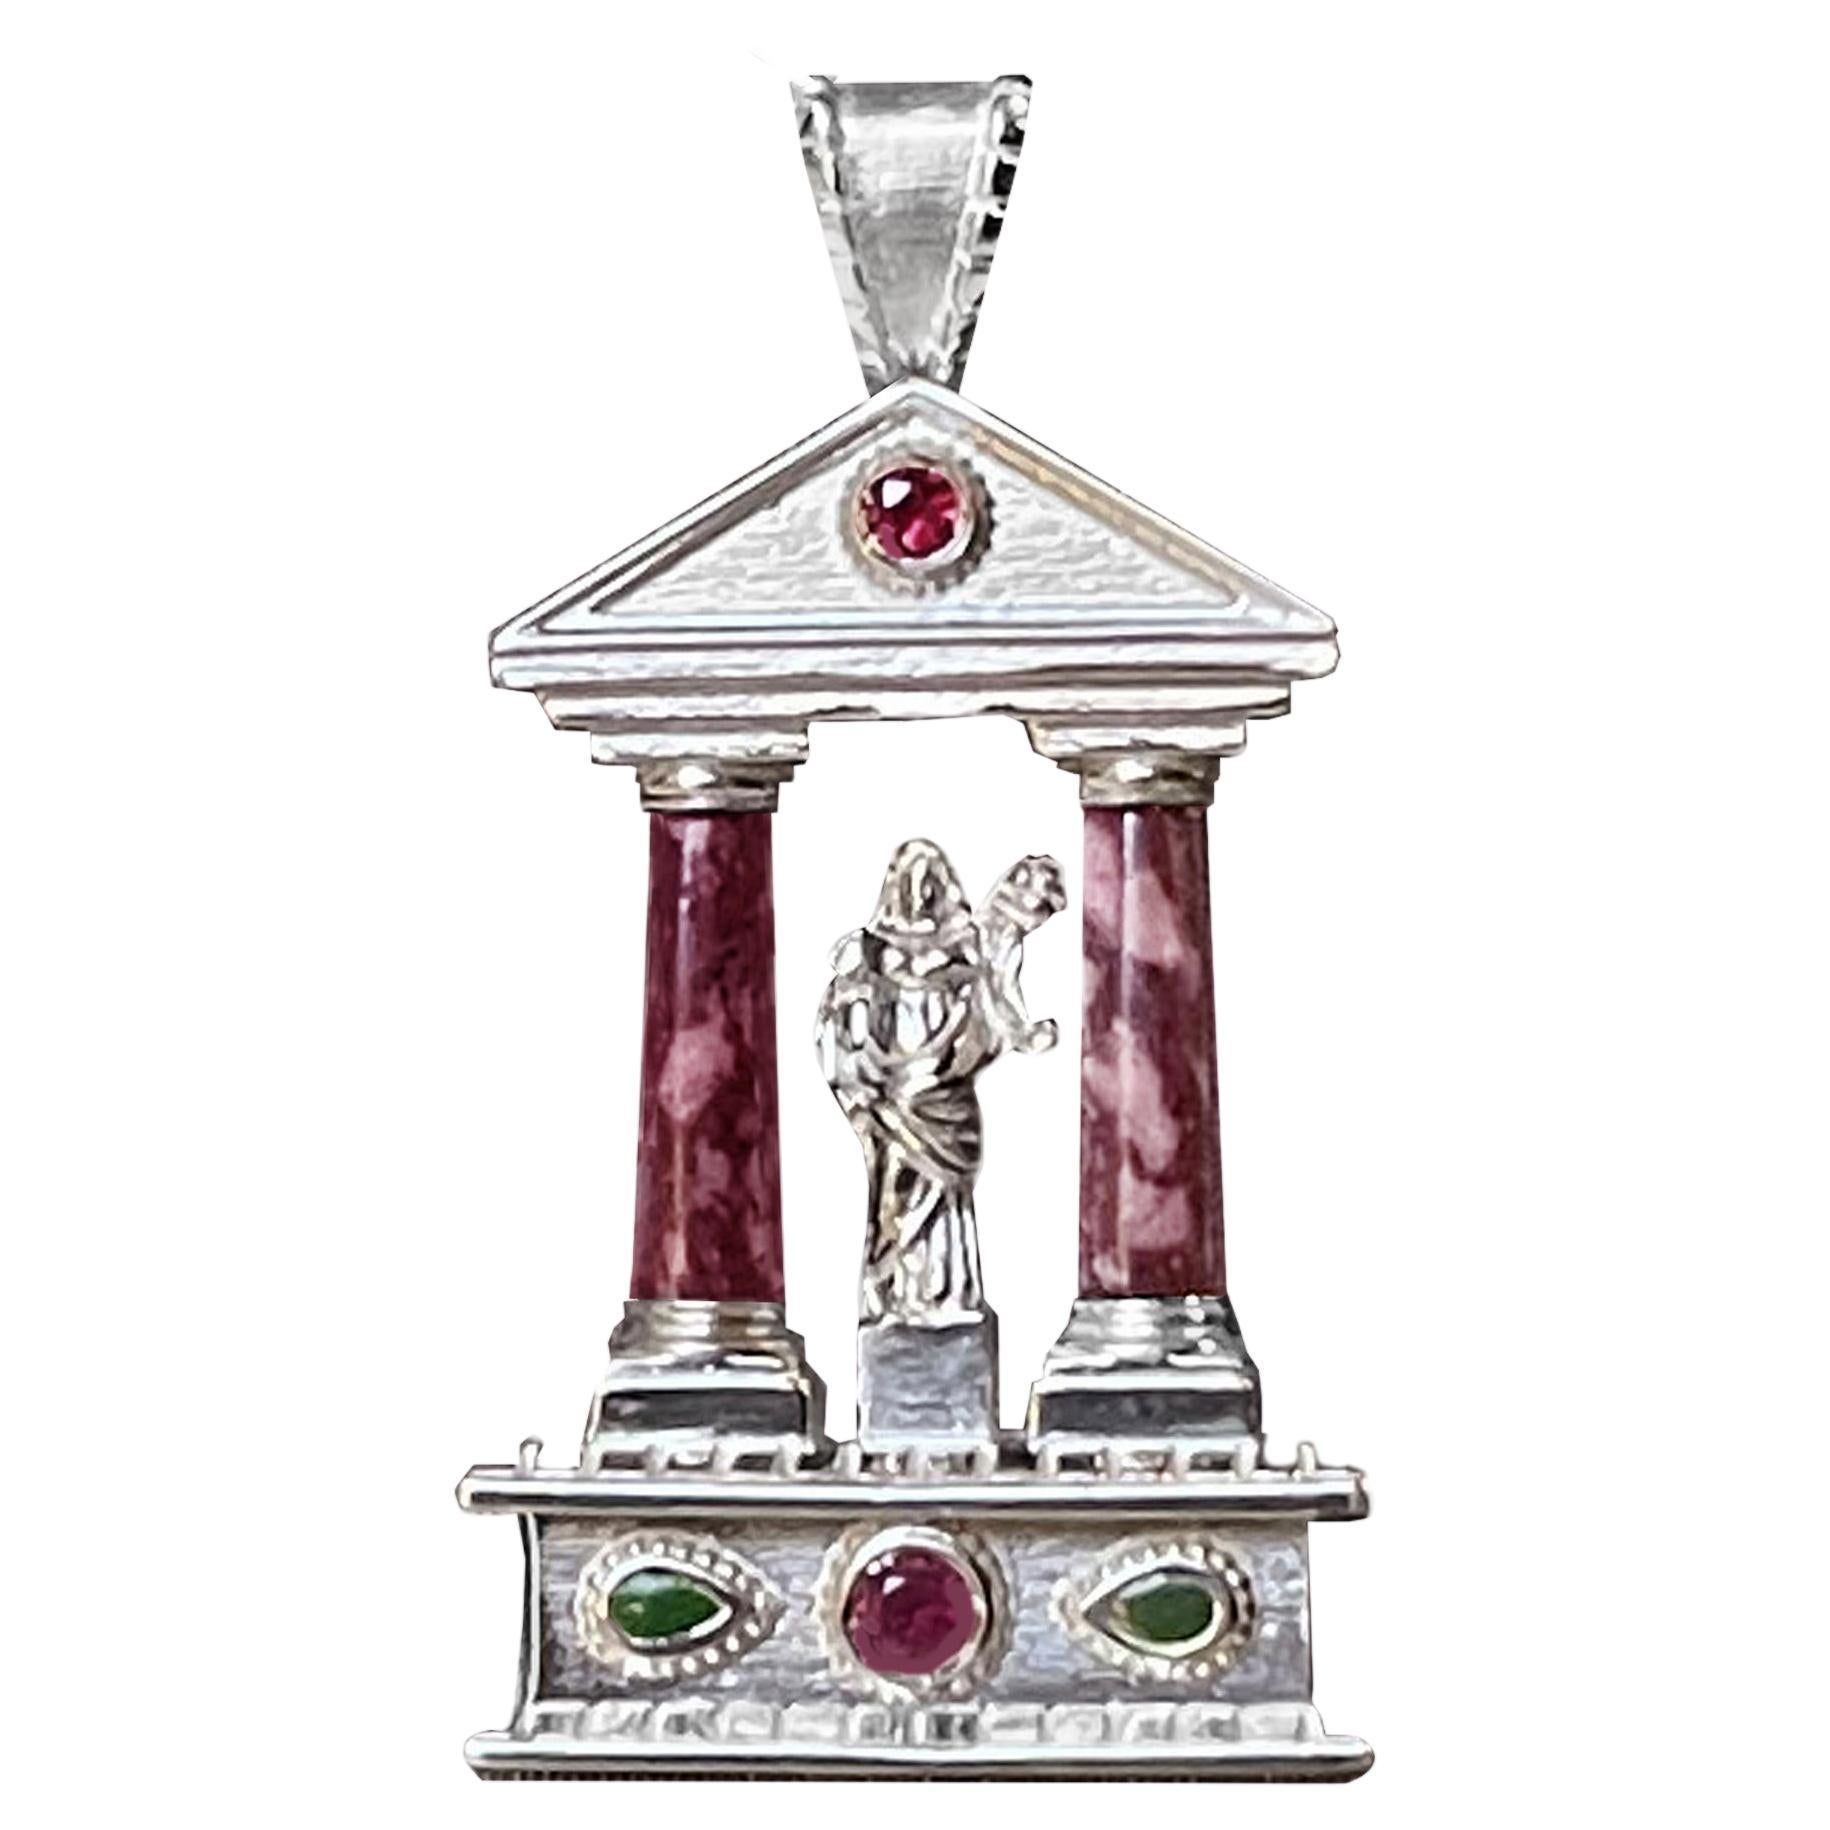 Roman Temple with Imperial Marbles (Porphyry and Serpentine) and Rubies Pendant For Sale